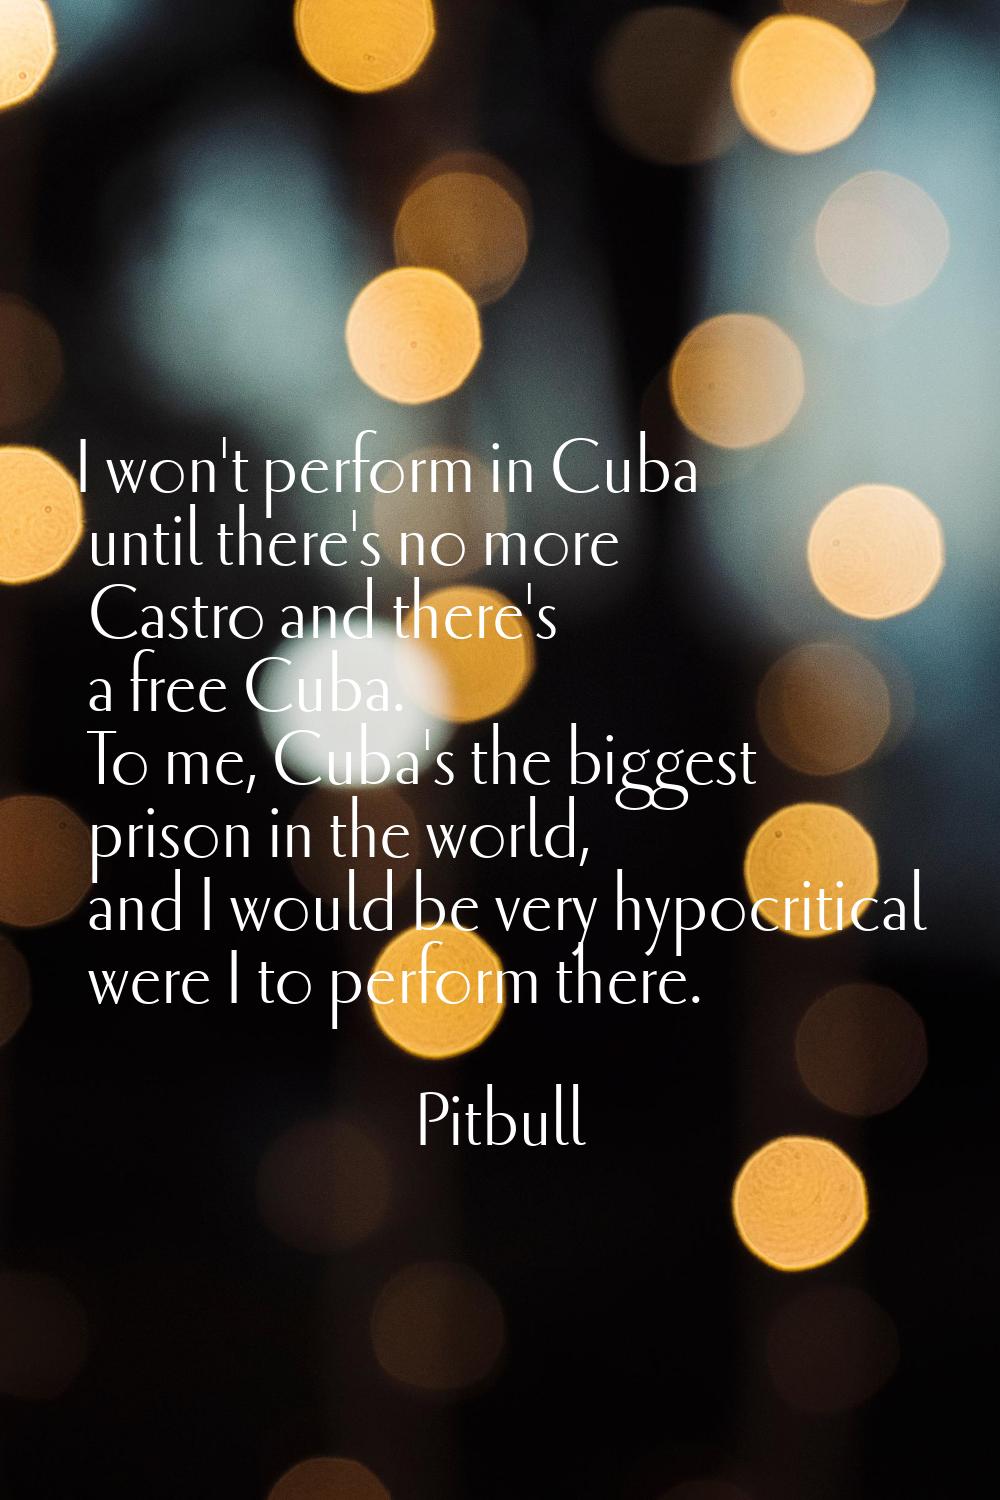 I won't perform in Cuba until there's no more Castro and there's a free Cuba. To me, Cuba's the big